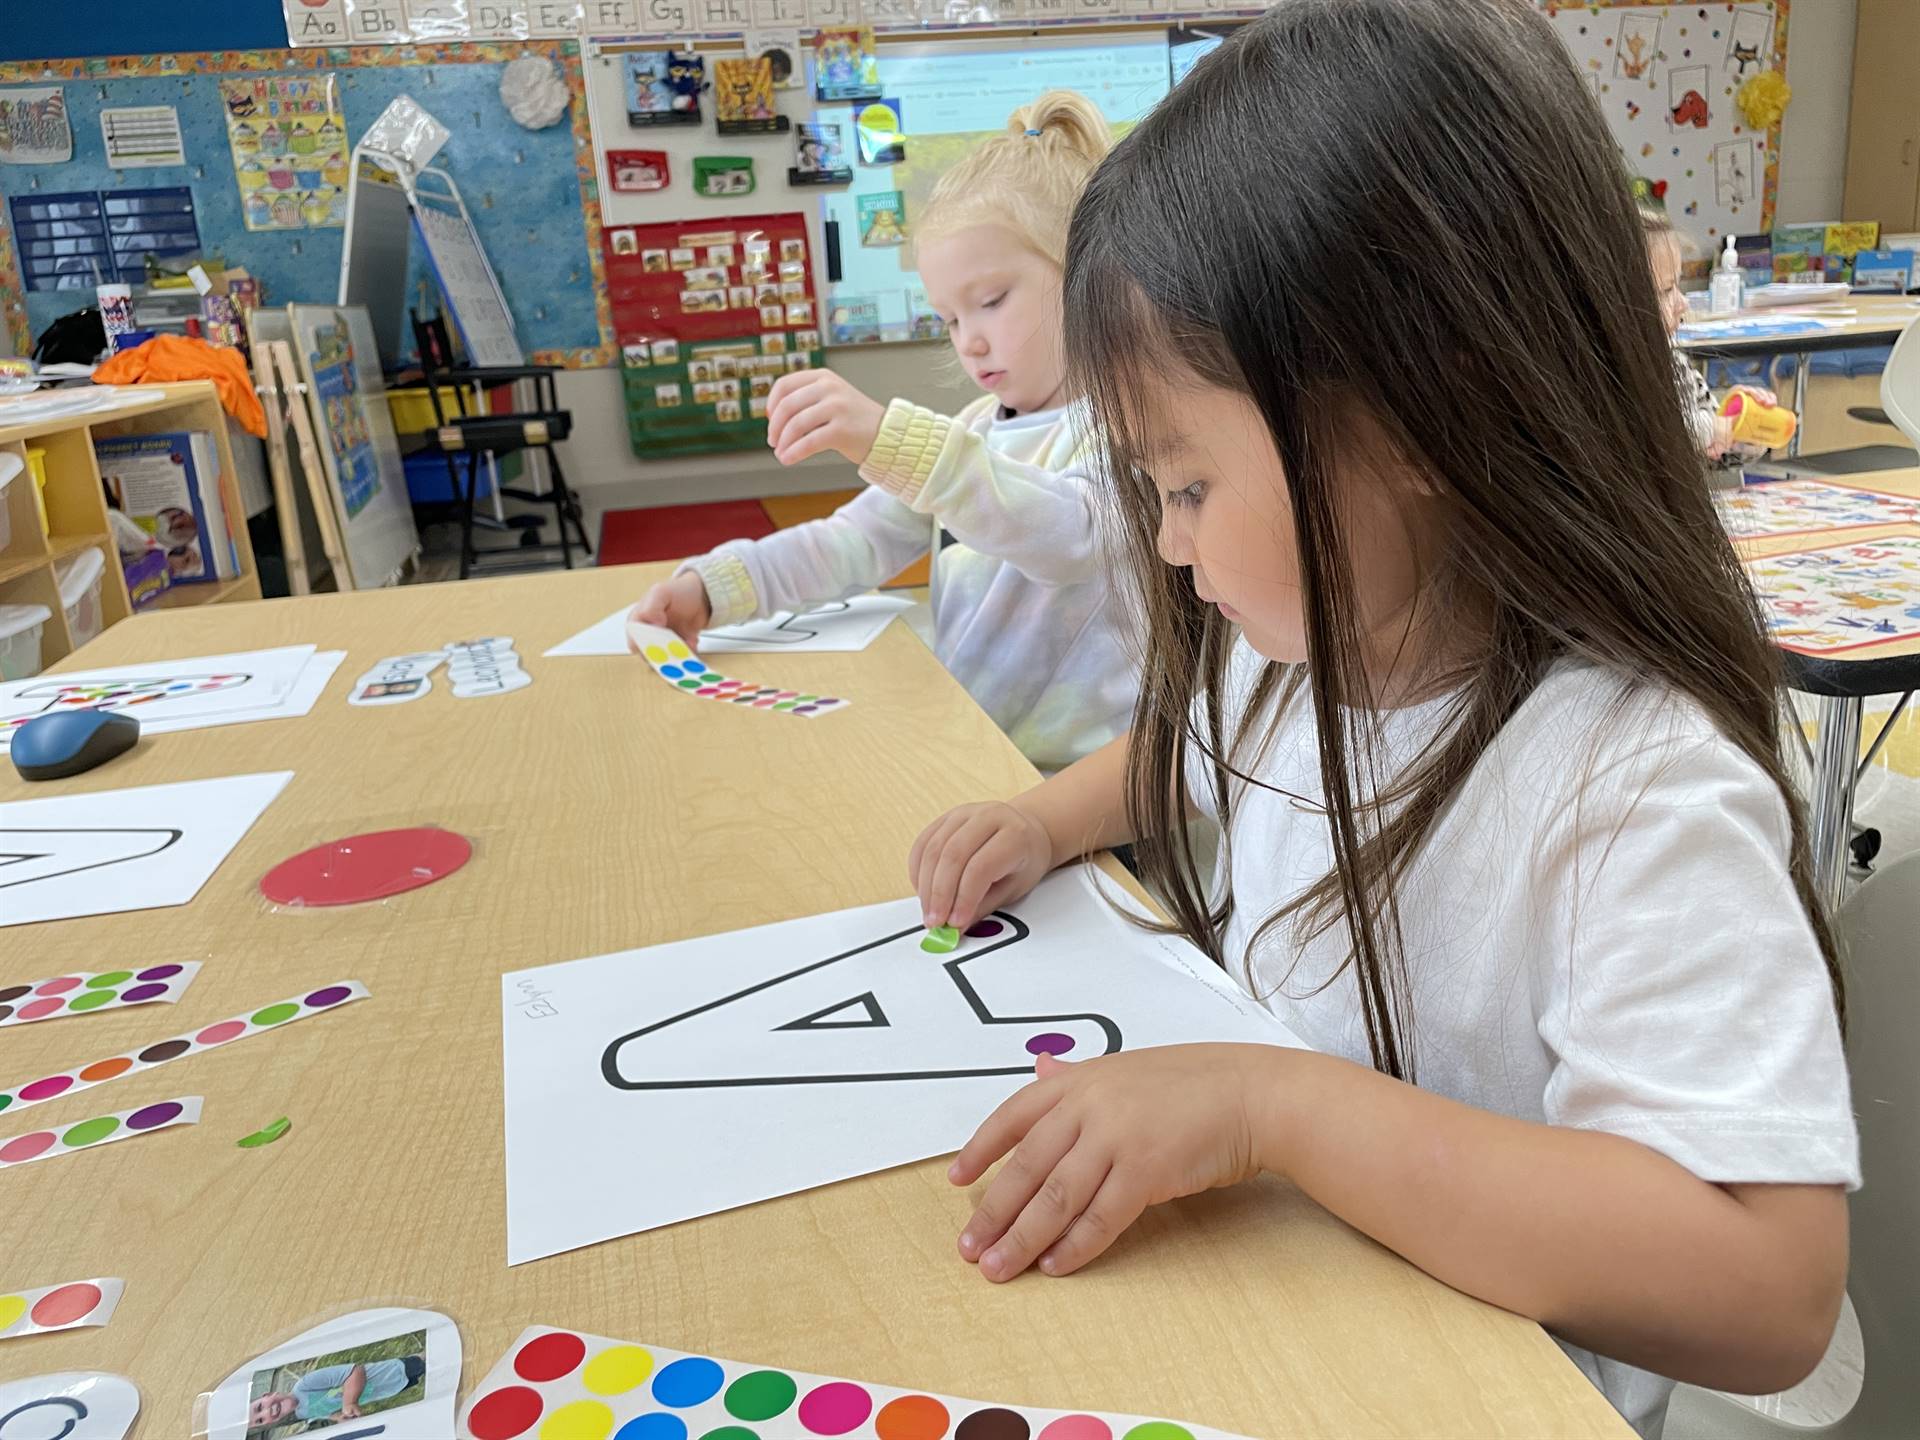 Using stickers to color letters!